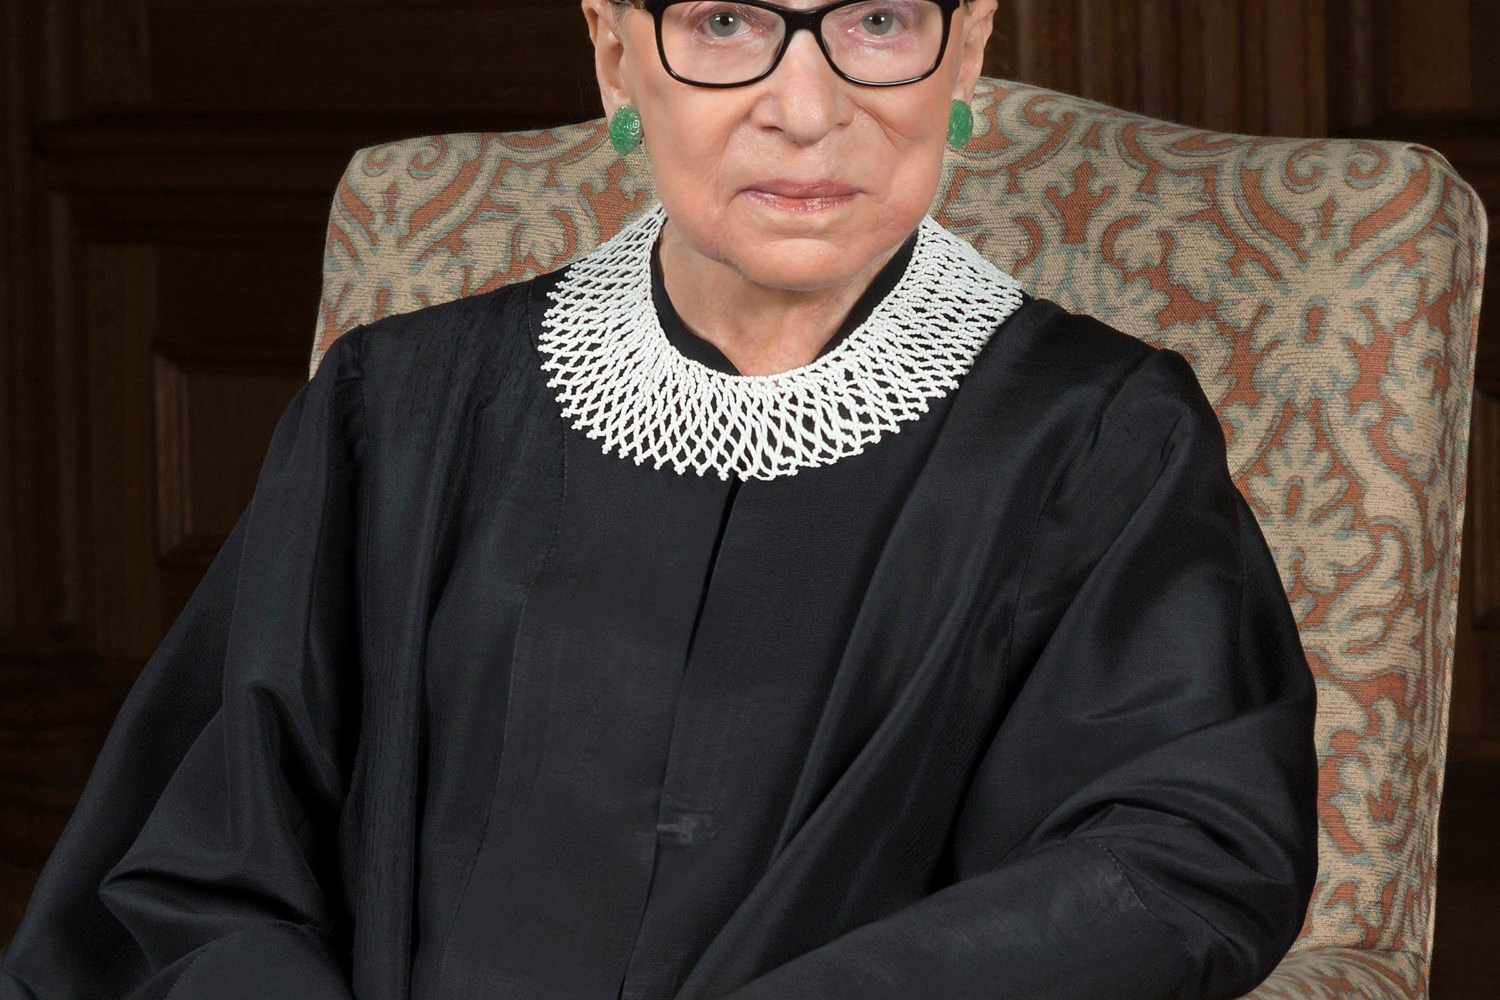 Ruth Bader Ginsburg would be an ideal namesake for Woodrow Wilson High School